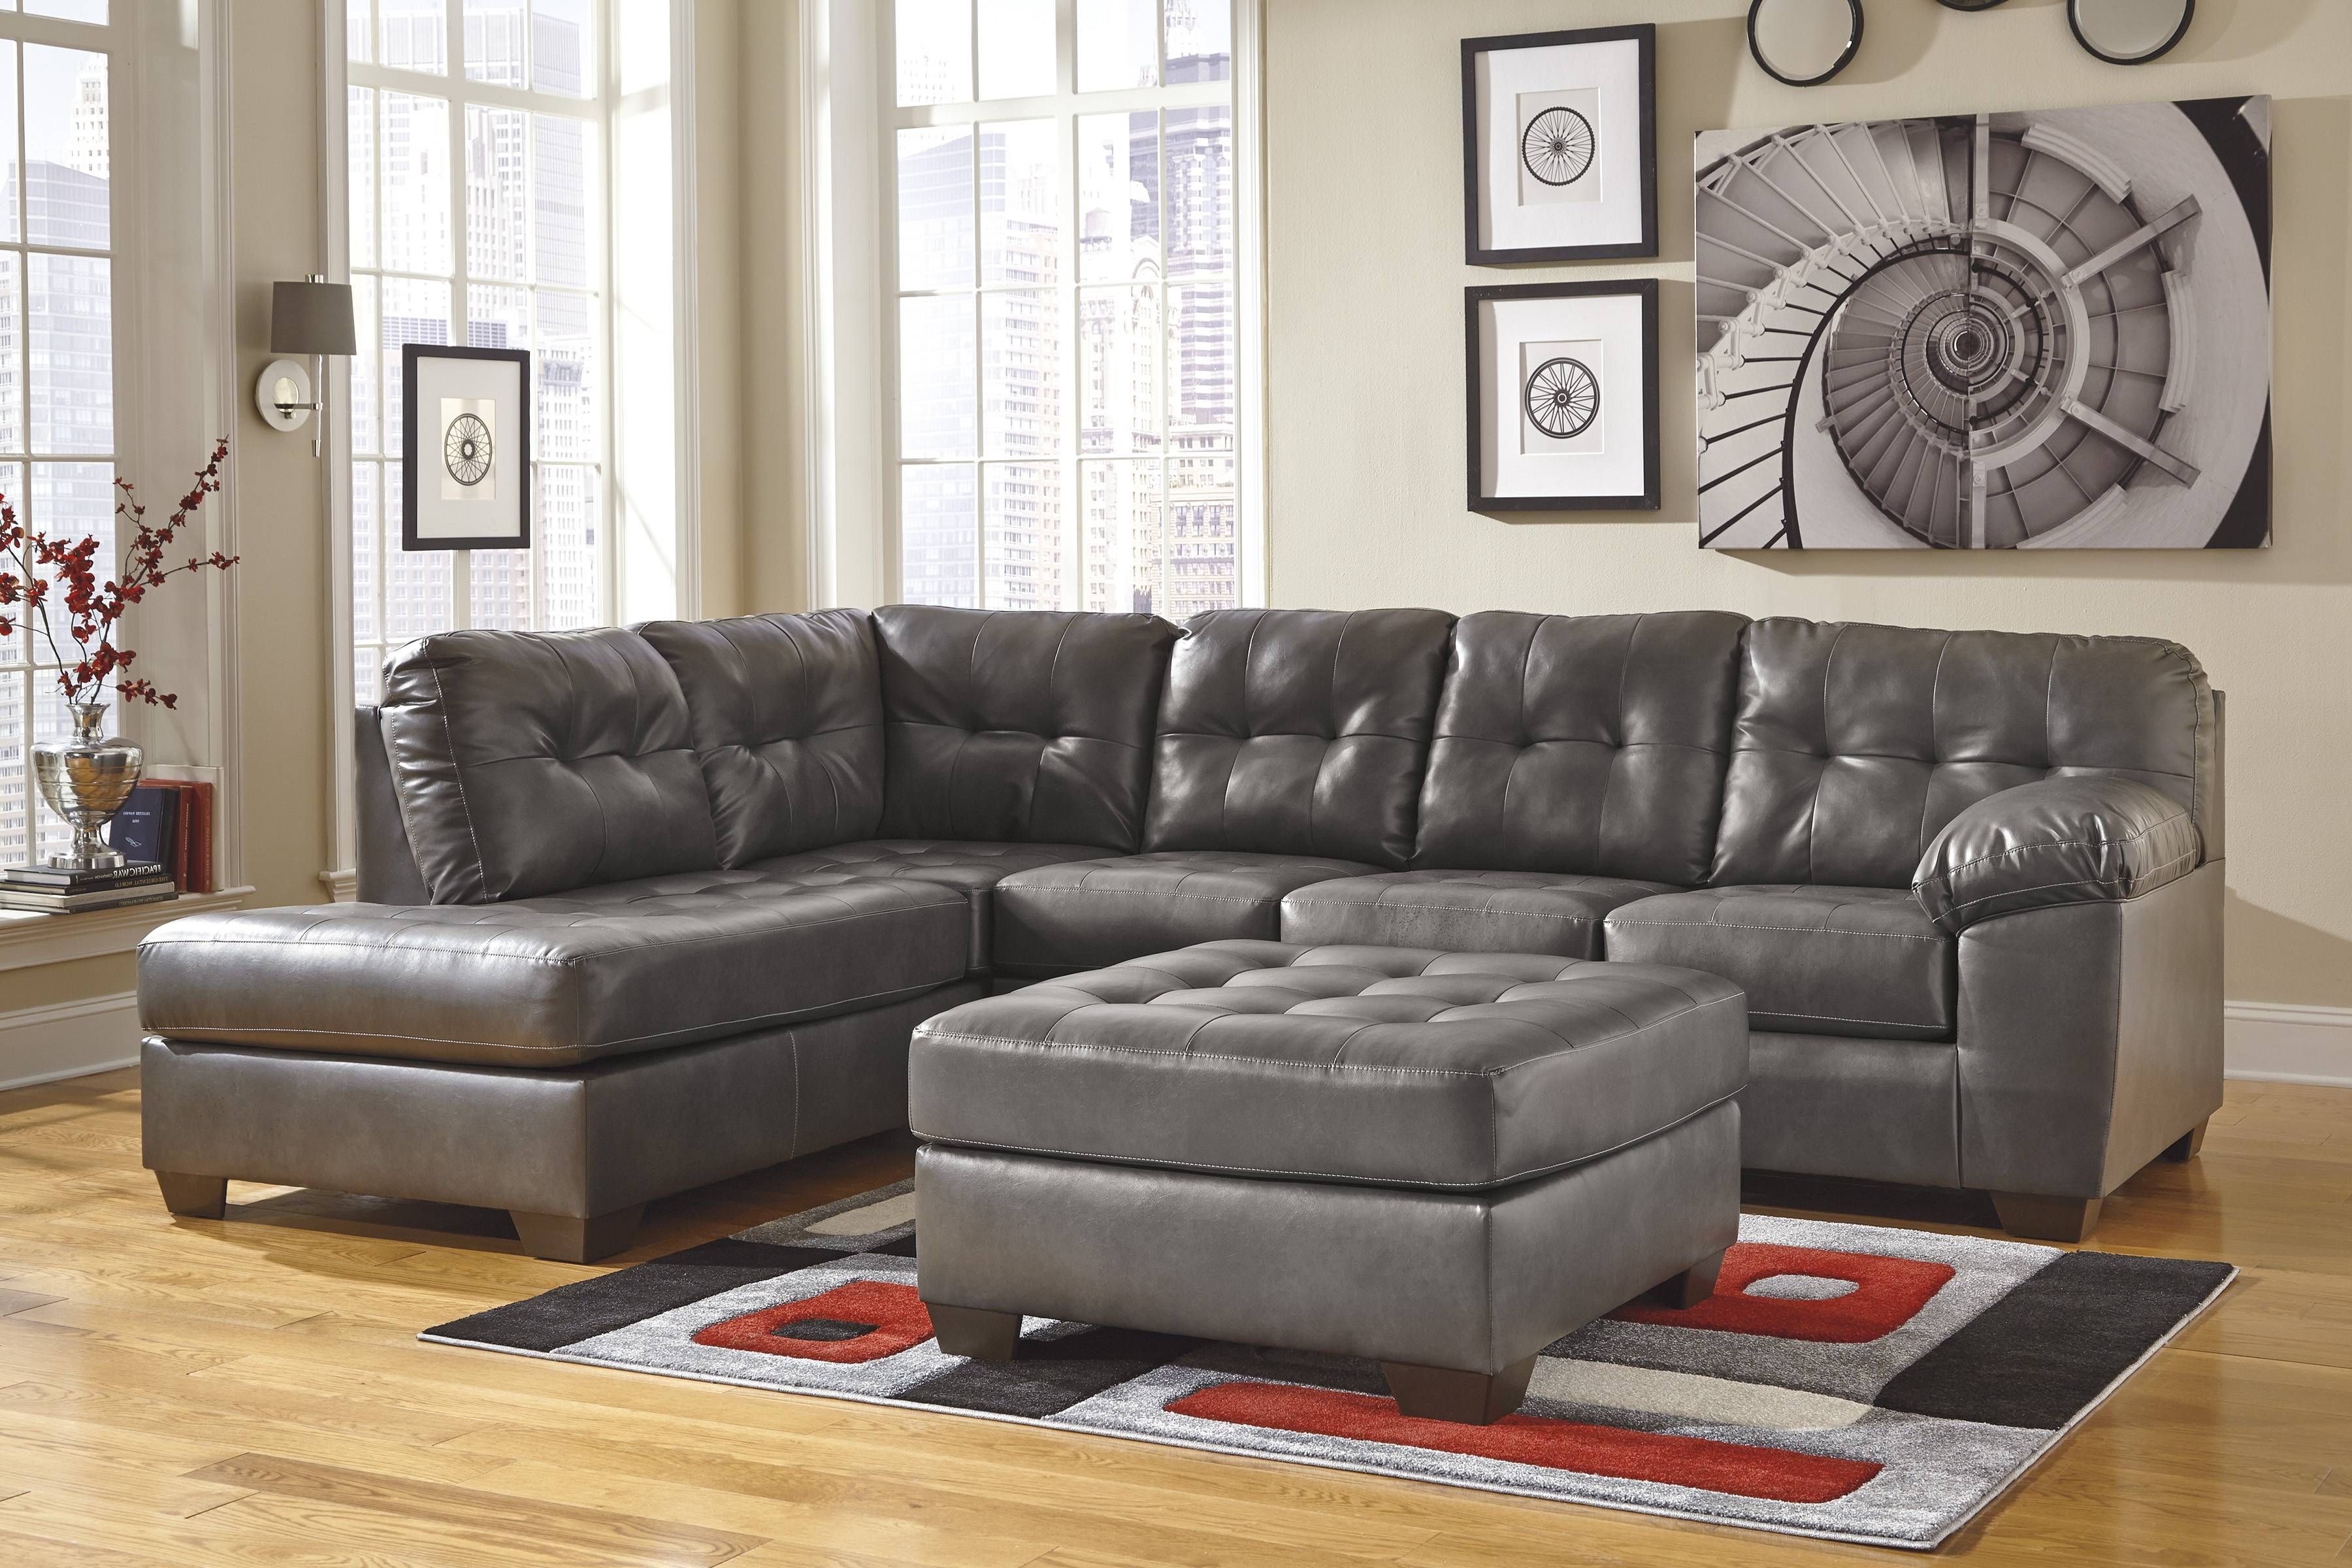 Chair & Sofa: Have An Interesting Living Room With Ashley Regarding Gray Leather Sectional Sofas (View 13 of 30)